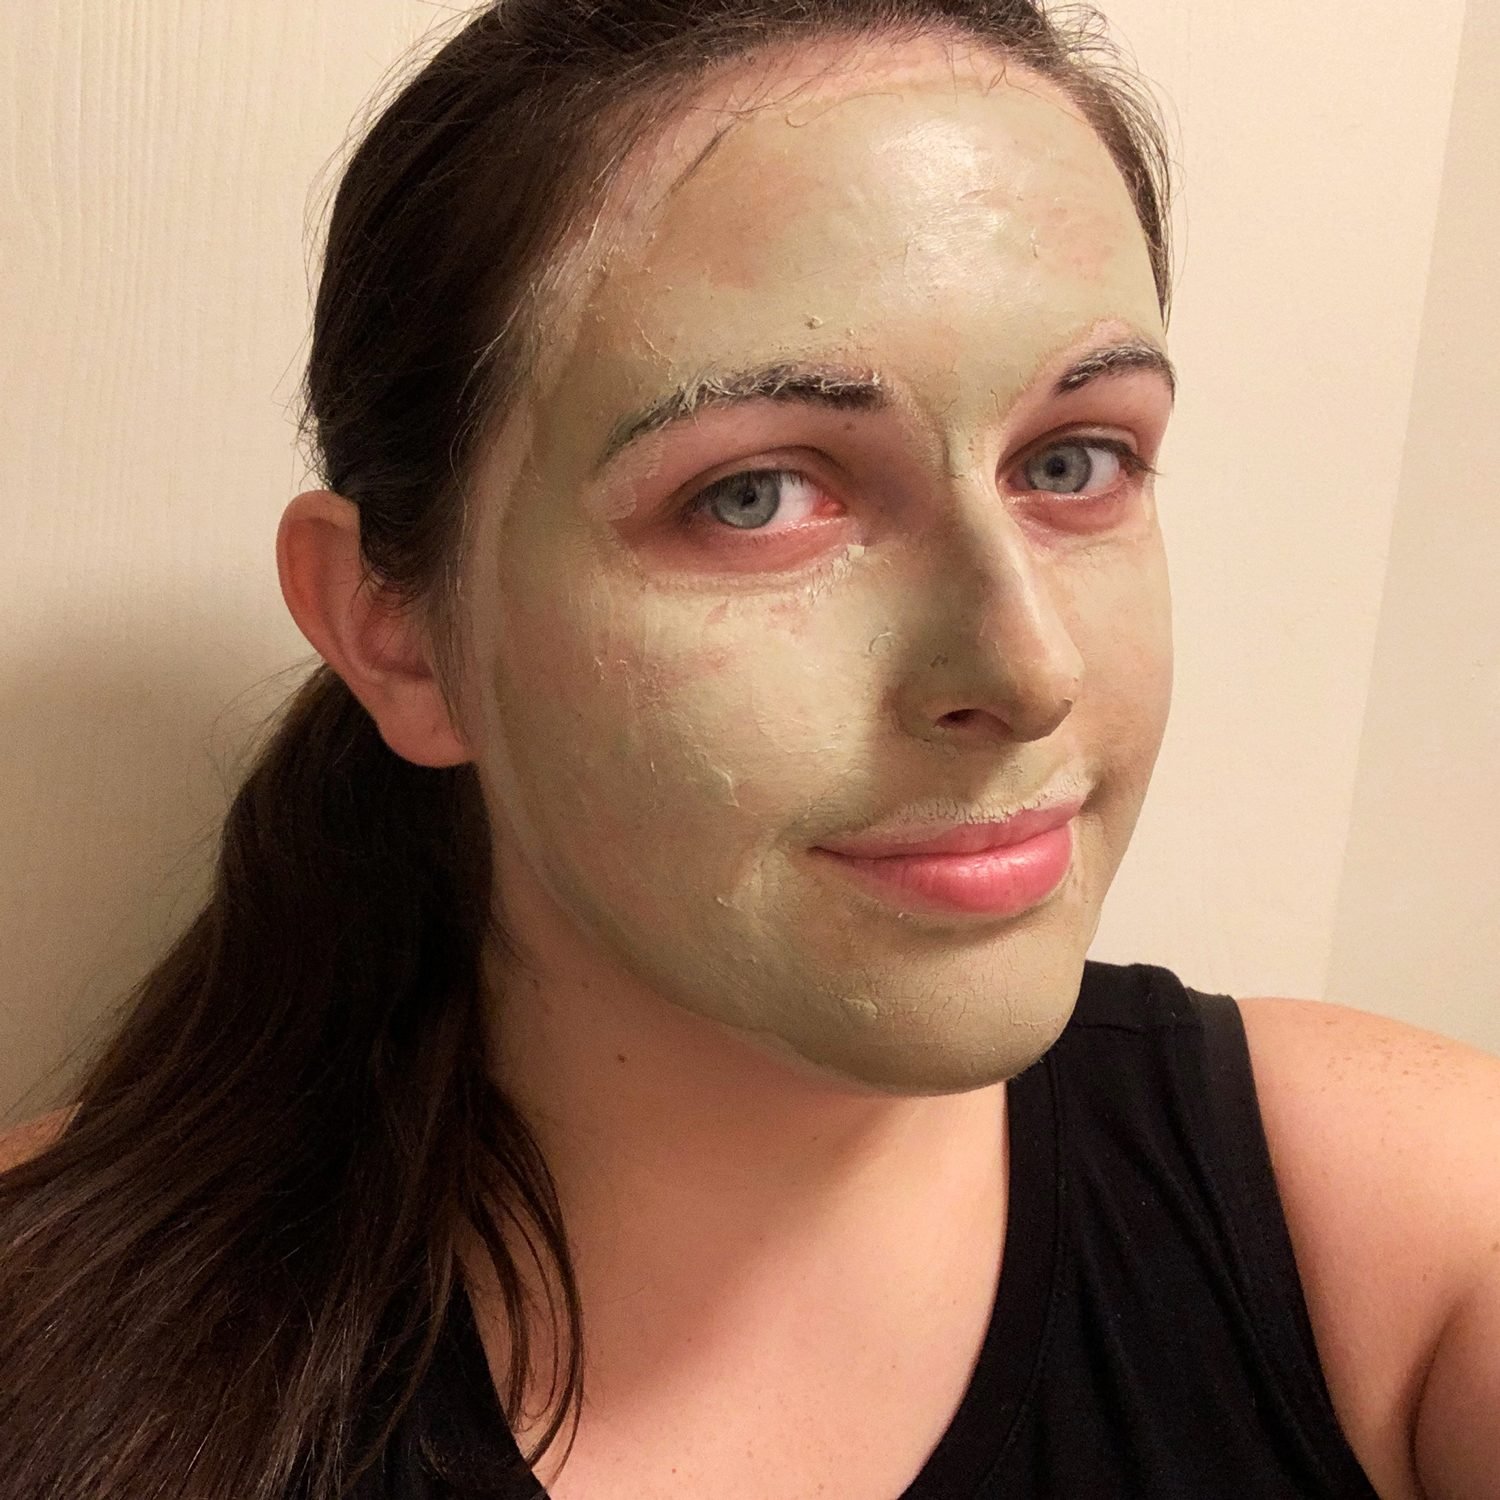 I Tried The Viral GREEN MASK STICK So You Don't Have To